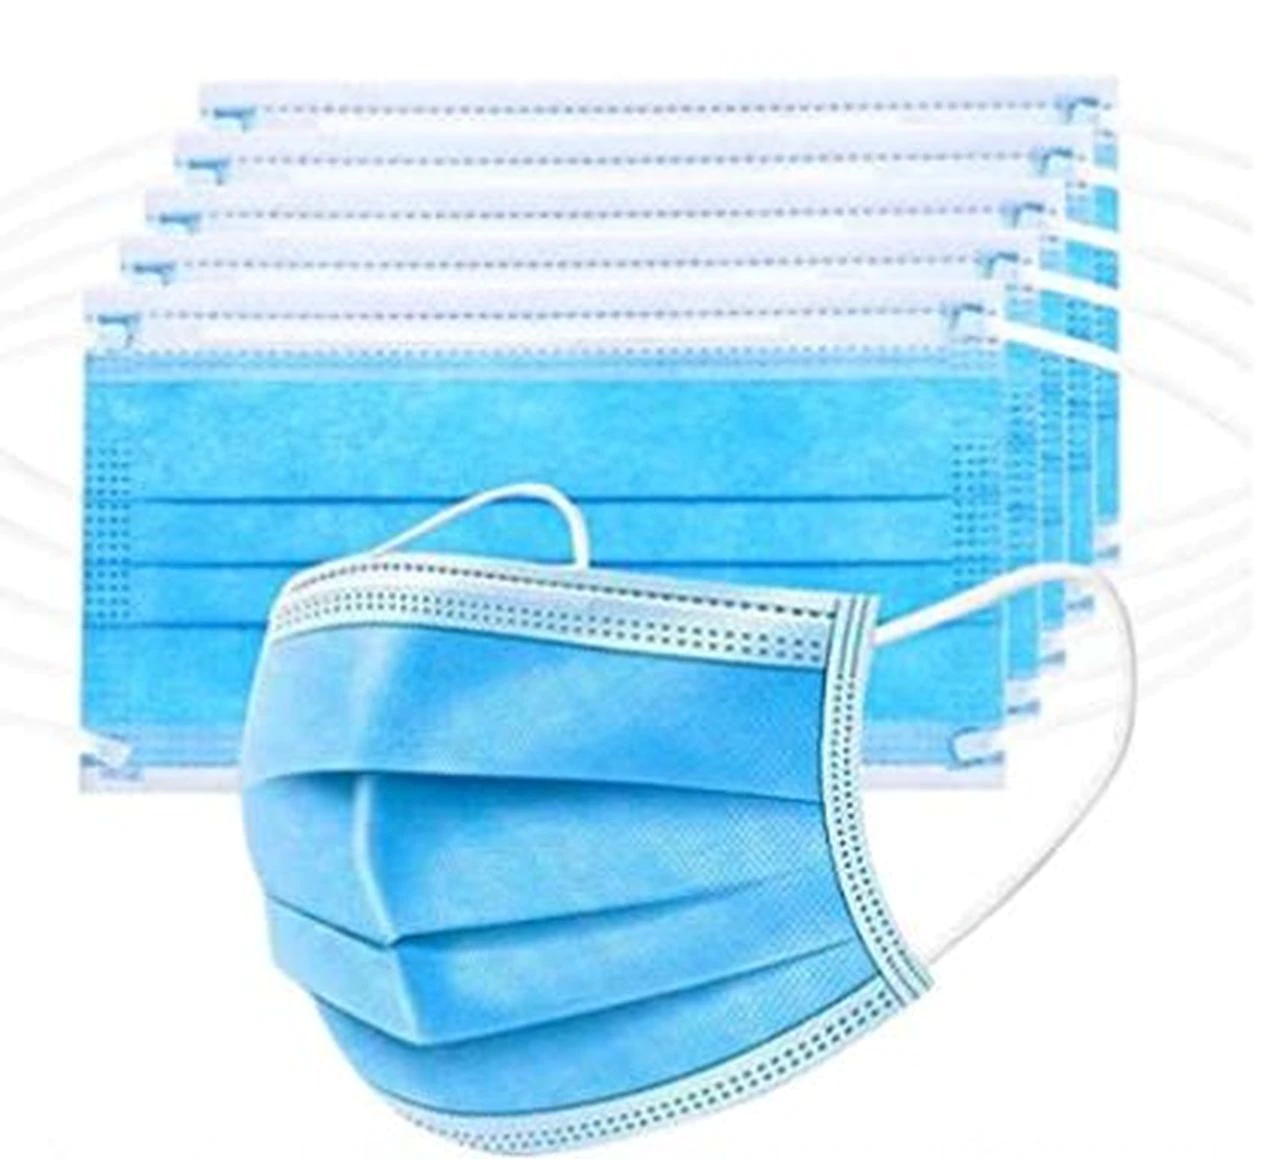 FREE 5-Pack of Disposable Face Masks